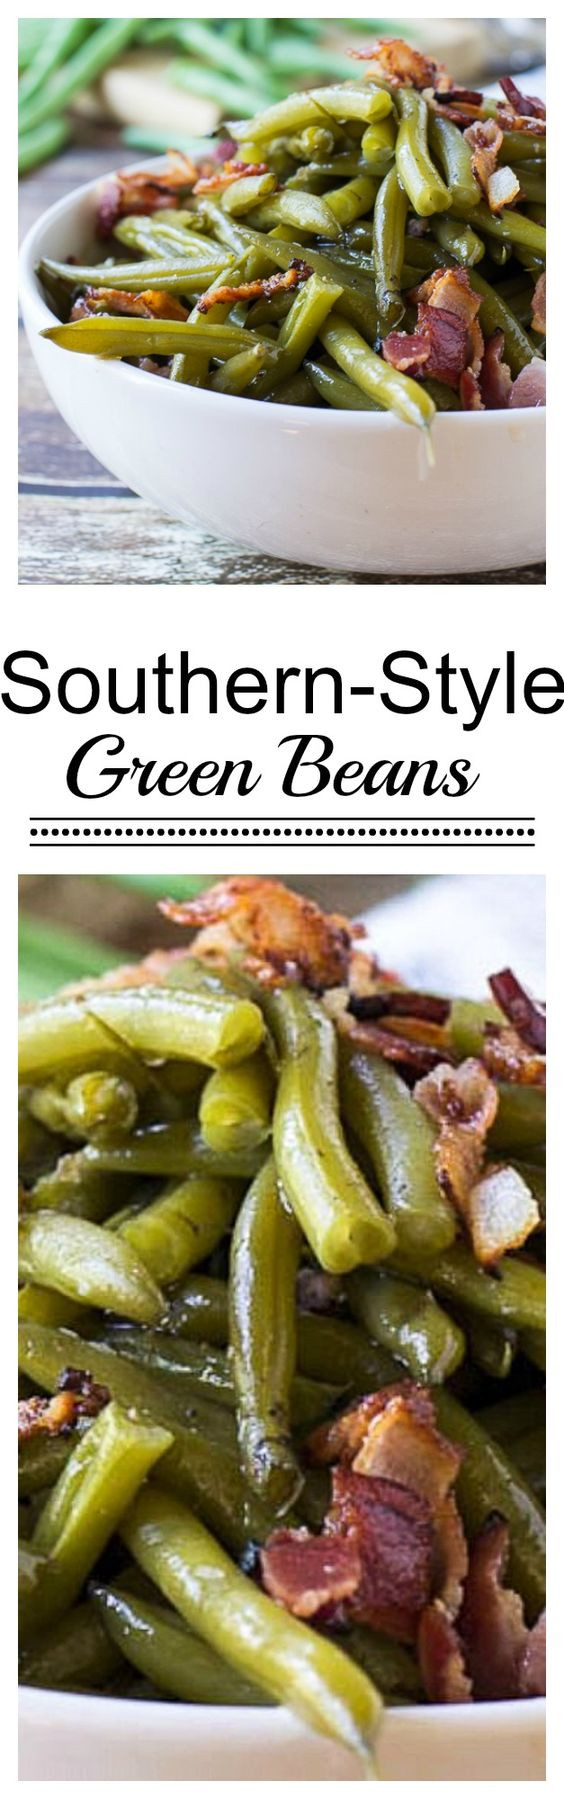 Southern Thanksgiving Side Dishes
 The BEST Thanksgiving Dinner Holiday Favorite Menu Recipes